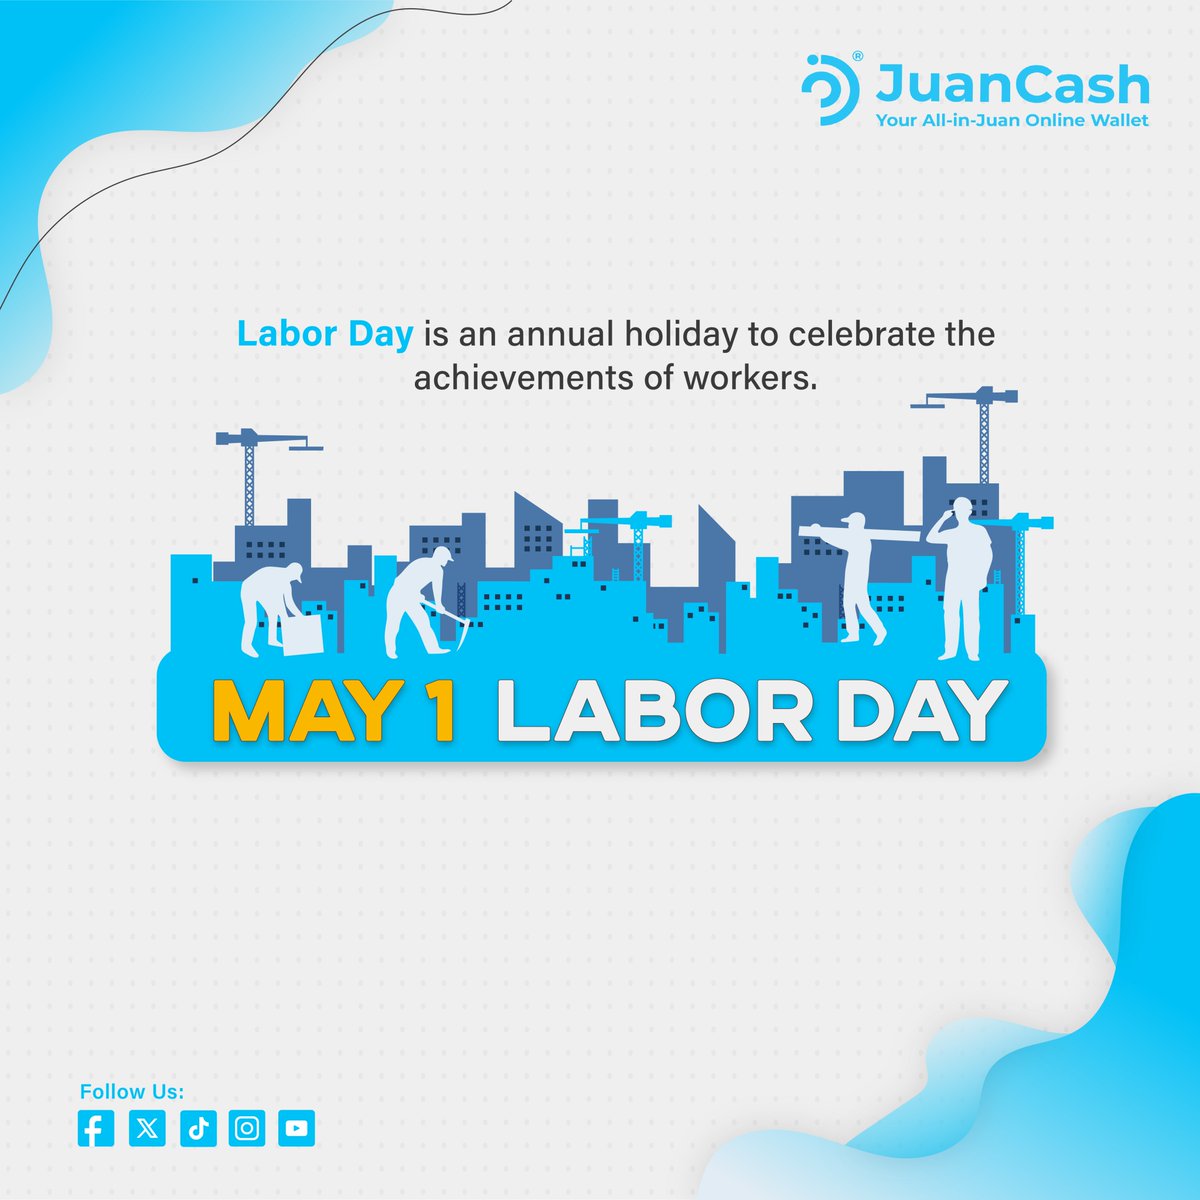 Wishing everyone a fantastic Labor Day! 🌟 
We're grateful for the dedication and passion our employees bring to our company every day. 
Take some time to unwind and celebrate 
your contributions! 🎈💼

#Juancash #JuanCashConvenience #AllInJuanCash 
#LaborDay #EmployeeRecognition